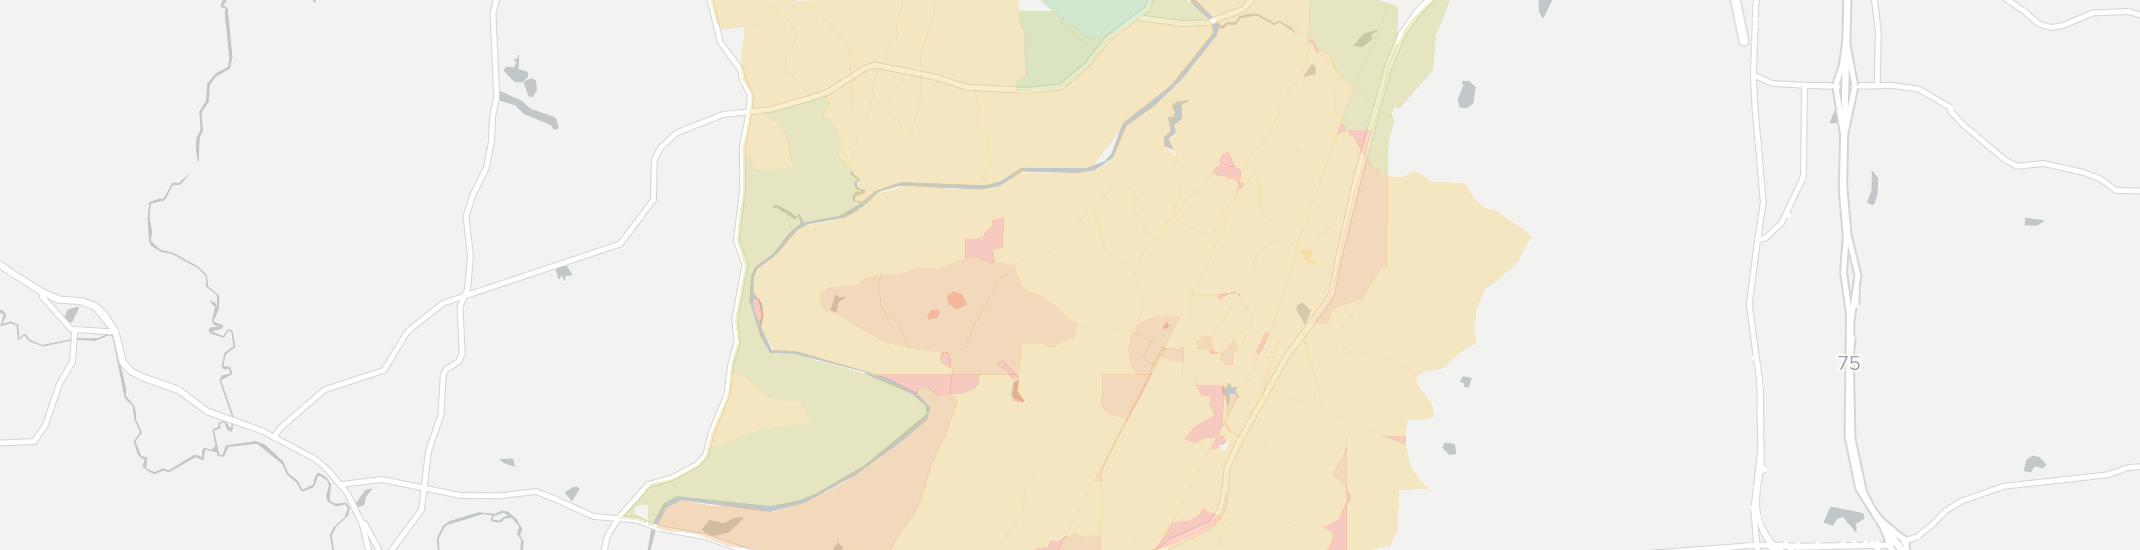 Plainville Internet Competition Map. Click for interactive map.